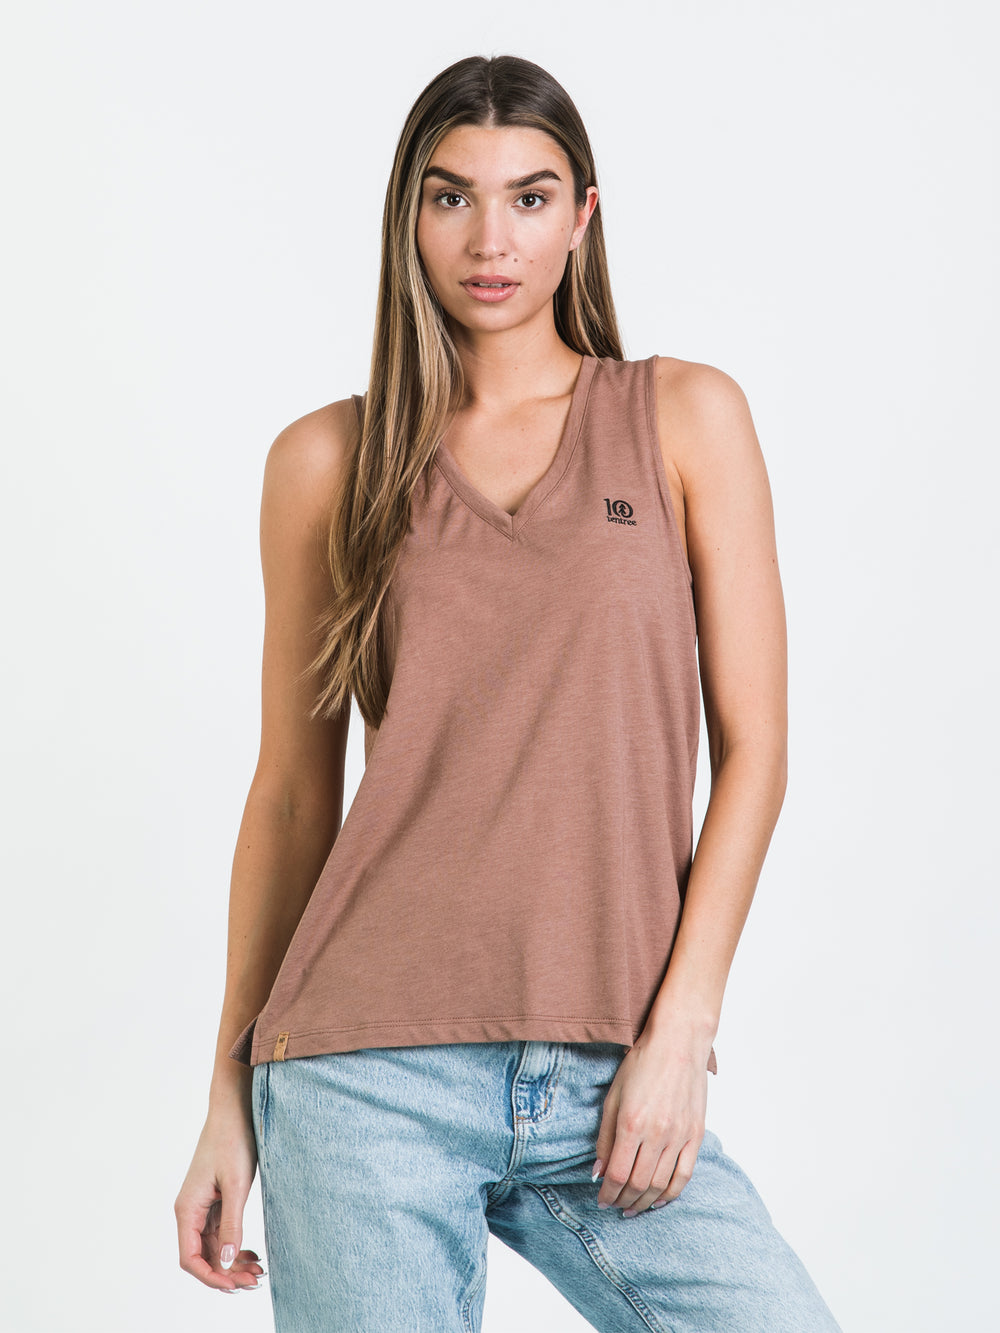 TENTREE LOGO EMBROIDERED VNECK Tank Top - CLEARANCE